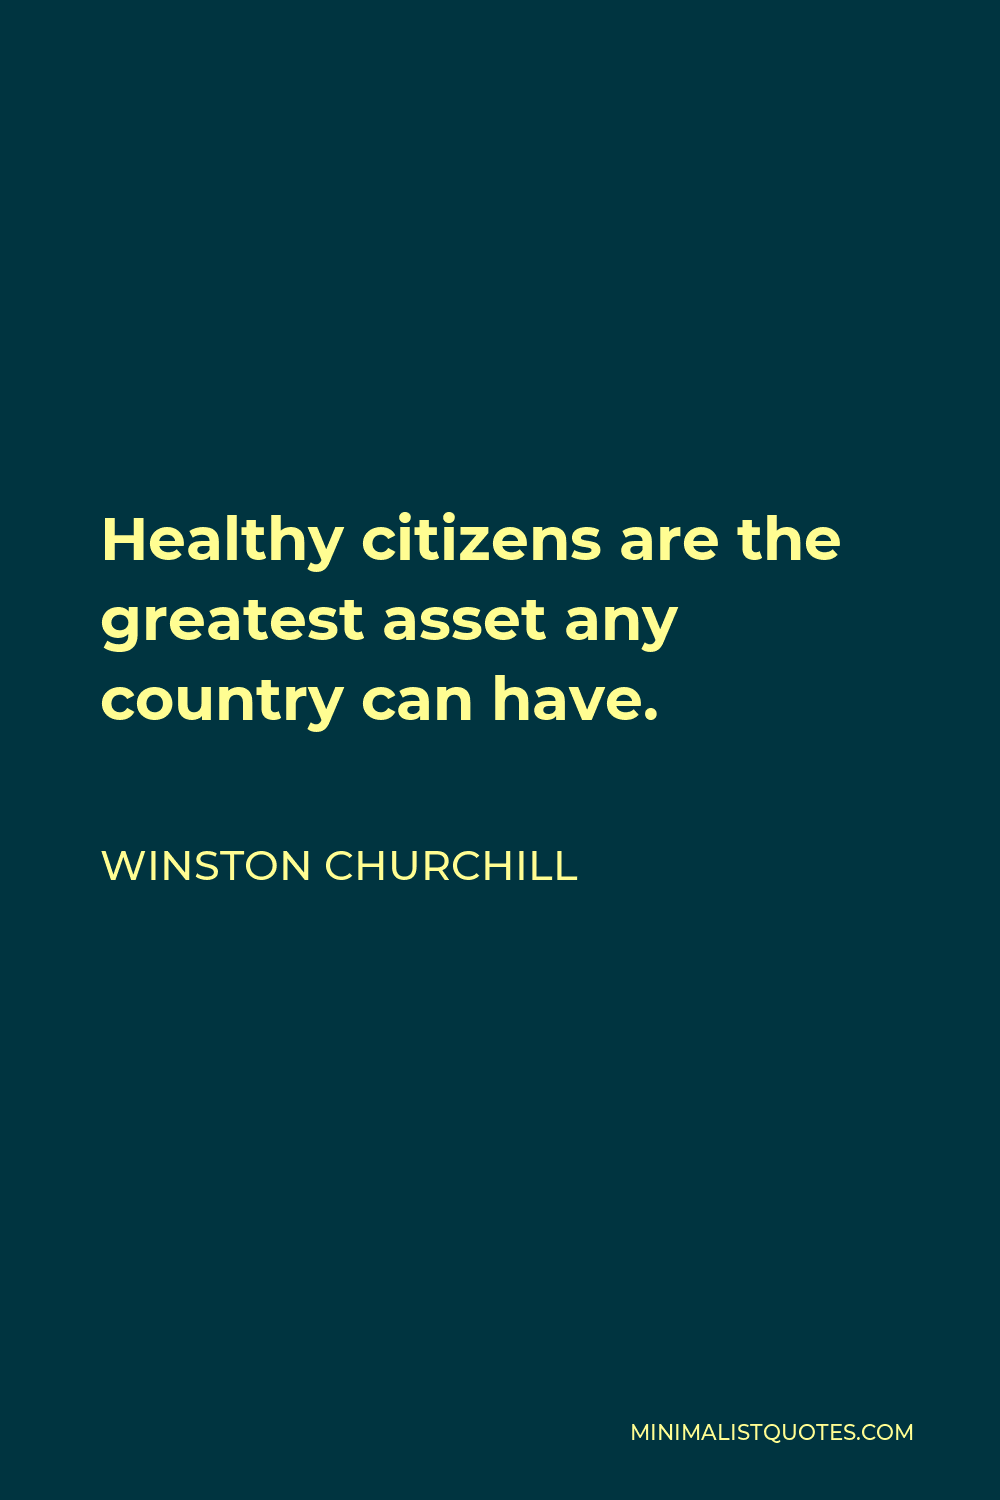 Winston Churchill Quote - Healthy citizens are the greatest asset any country can have.